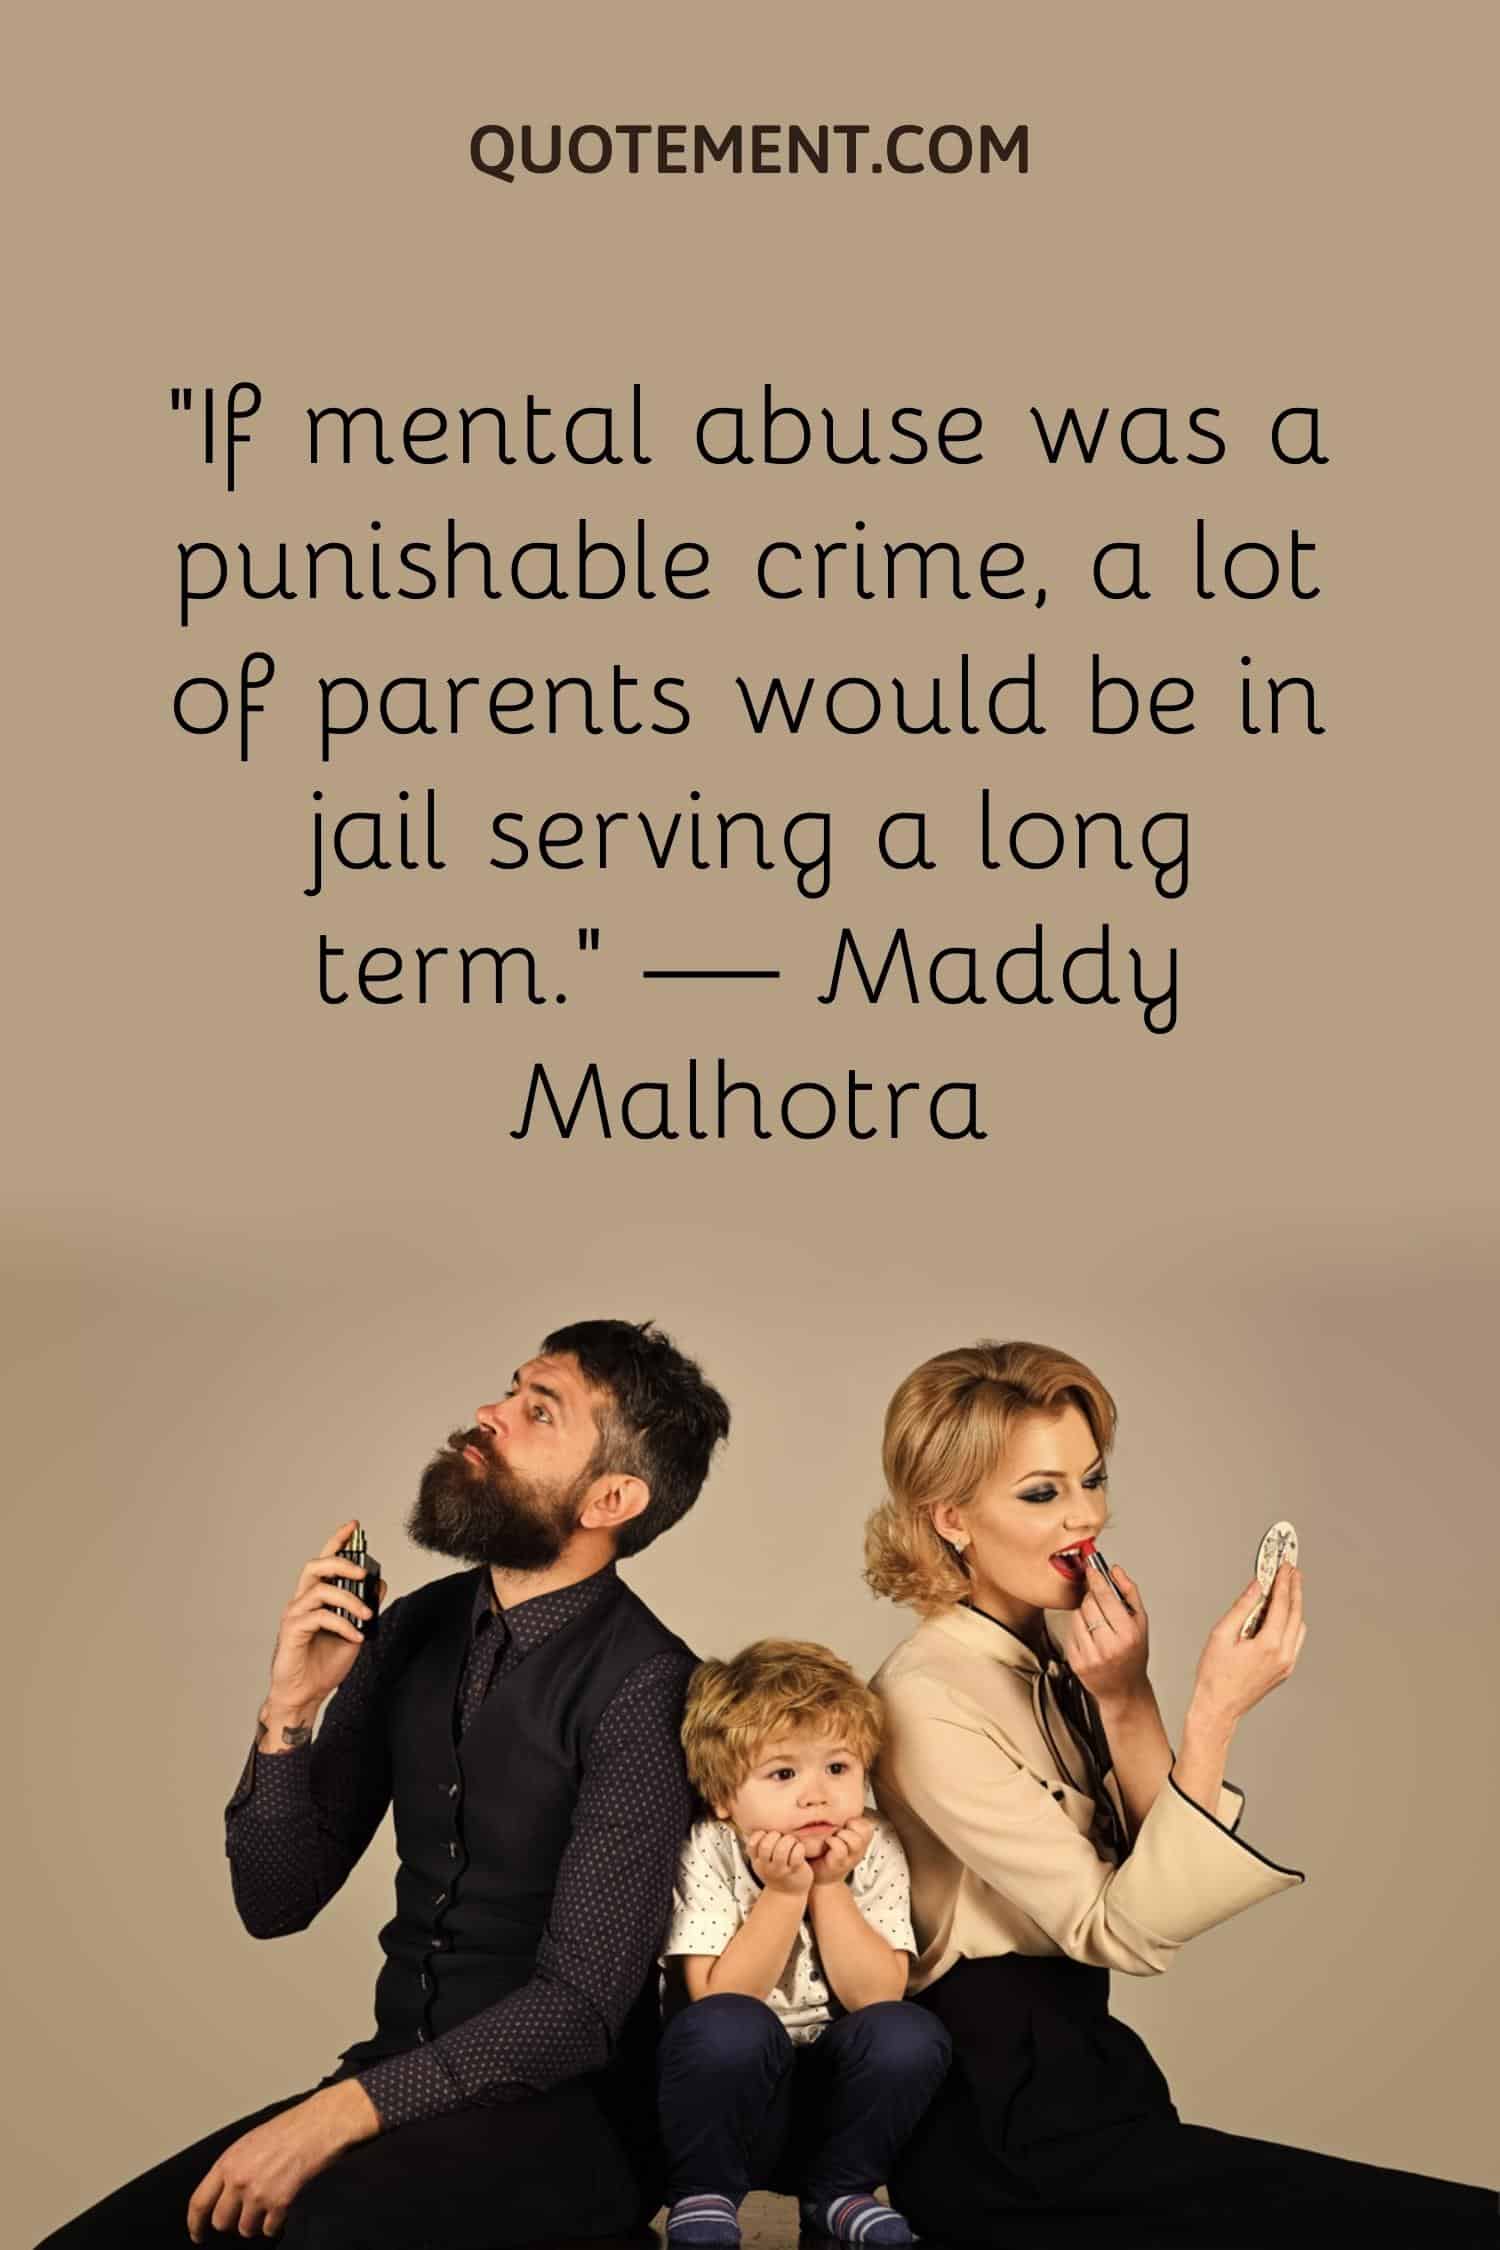  a lot of parents would be in jail serving a long term